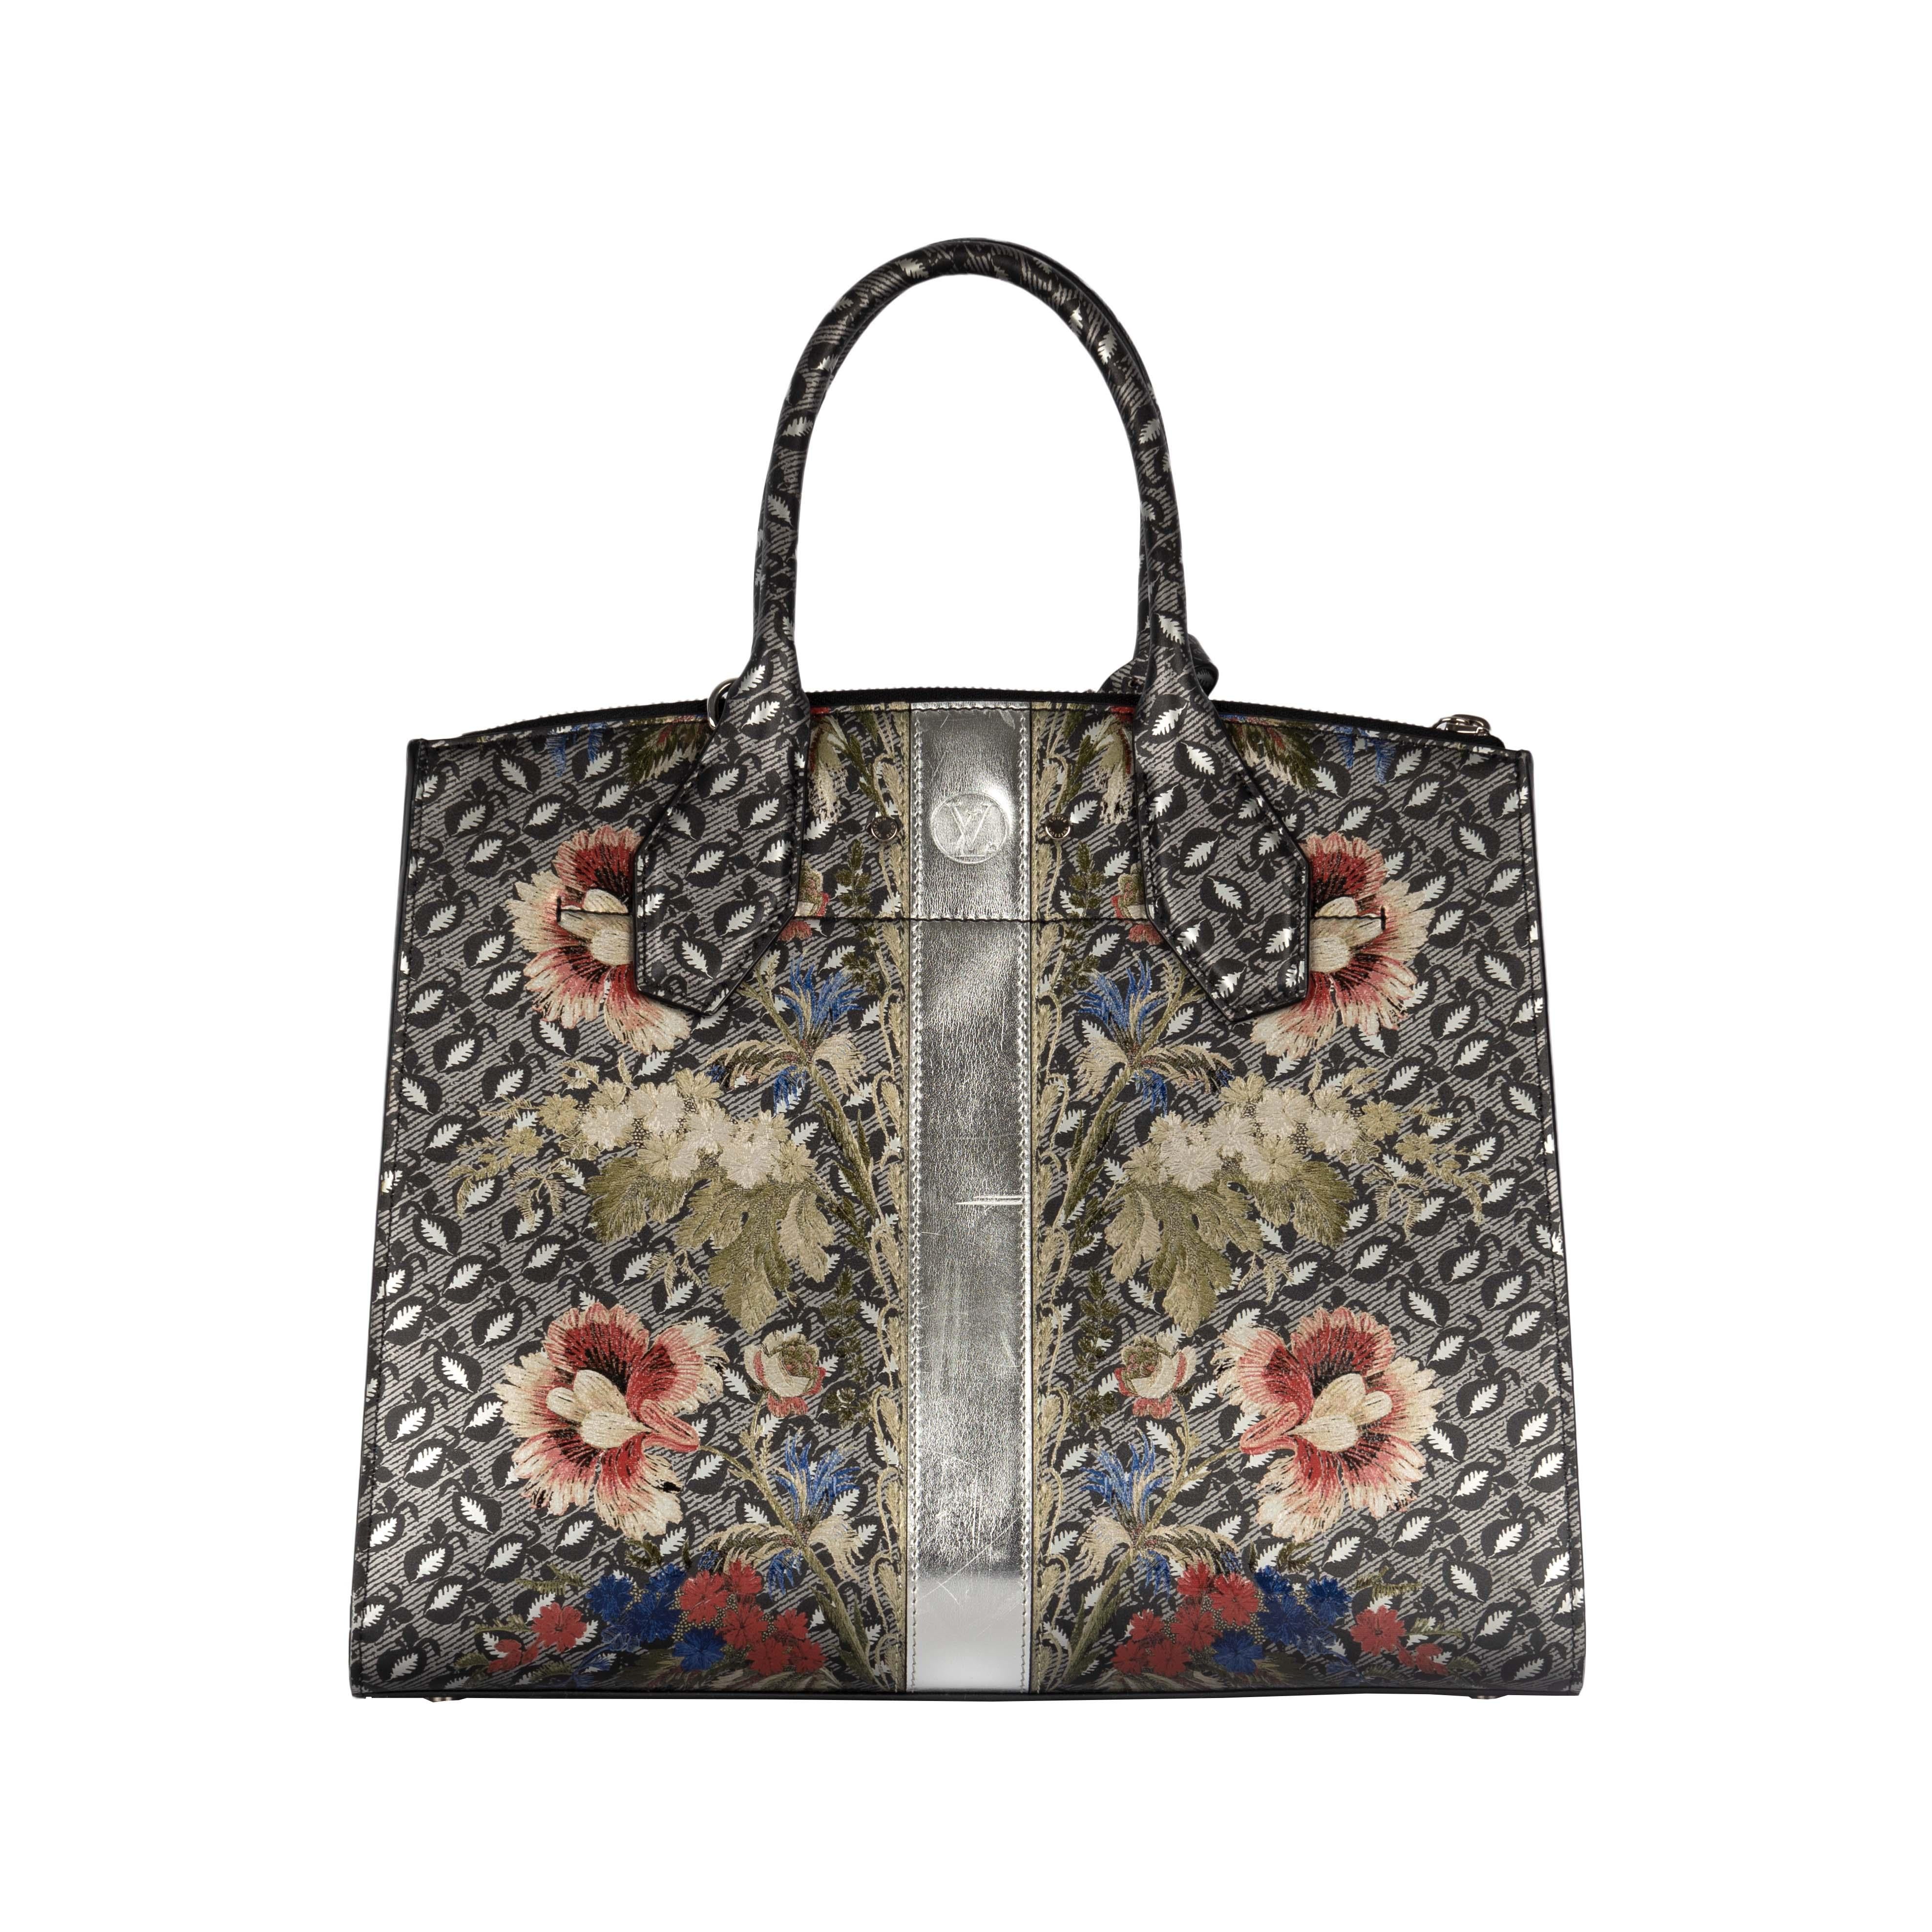 Launched under the S/S 2018 collection, this Louis Vuitton Epi Floral City Steamer MM is a vision to behold. With the romantic multicolored floral print accentuated by with silver panel in the center, the metallic attachments and hardware are